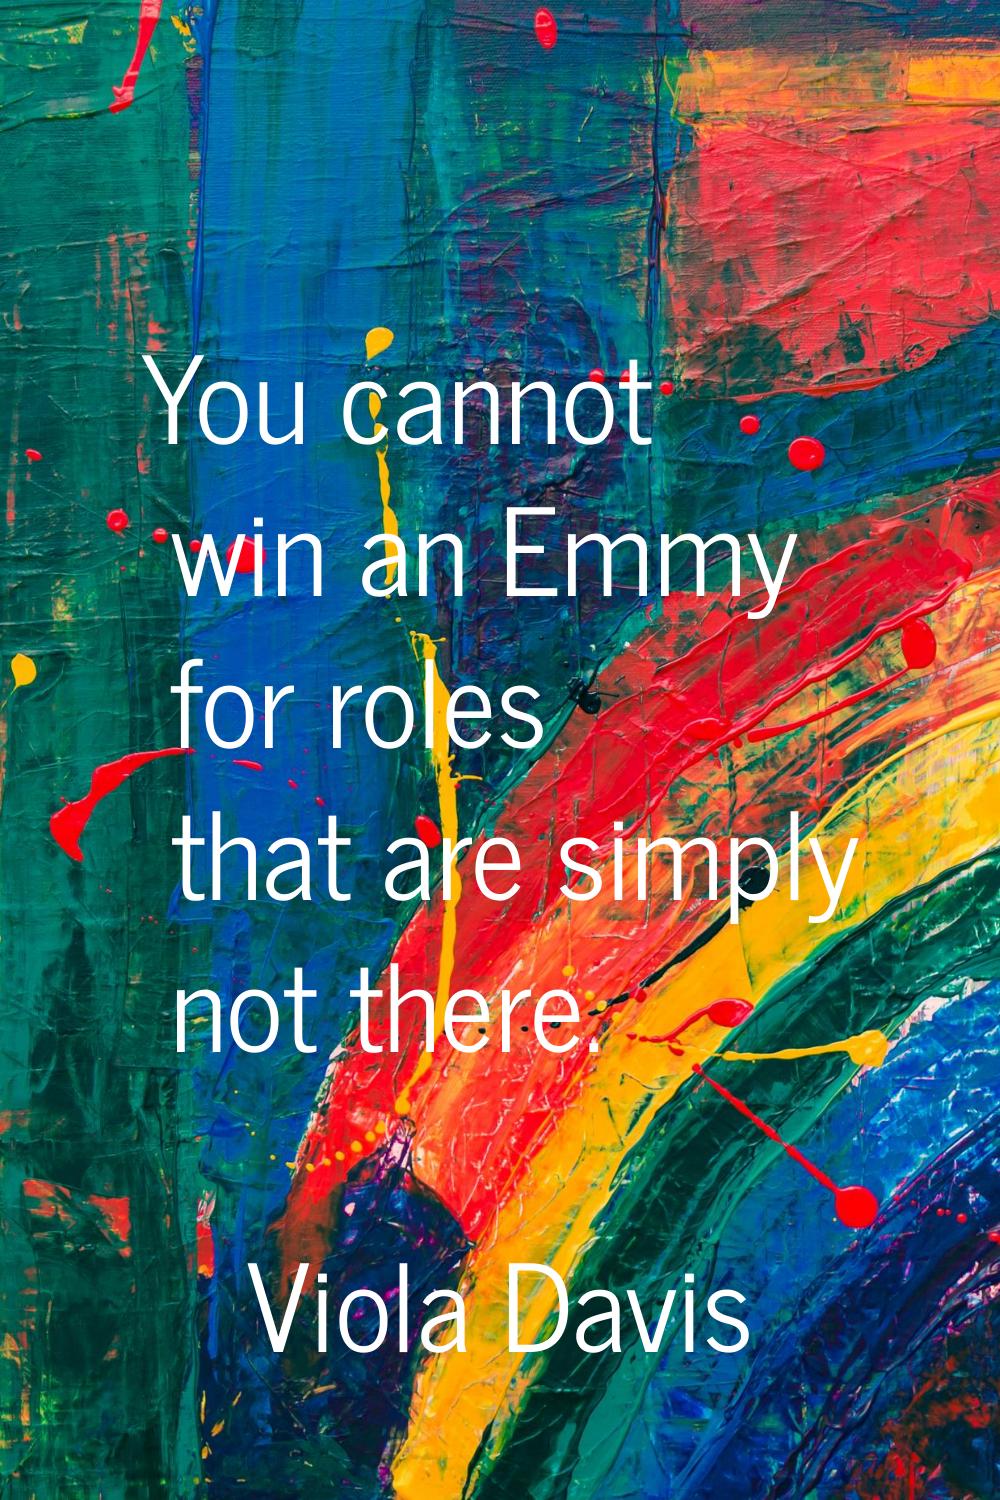 You cannot win an Emmy for roles that are simply not there.